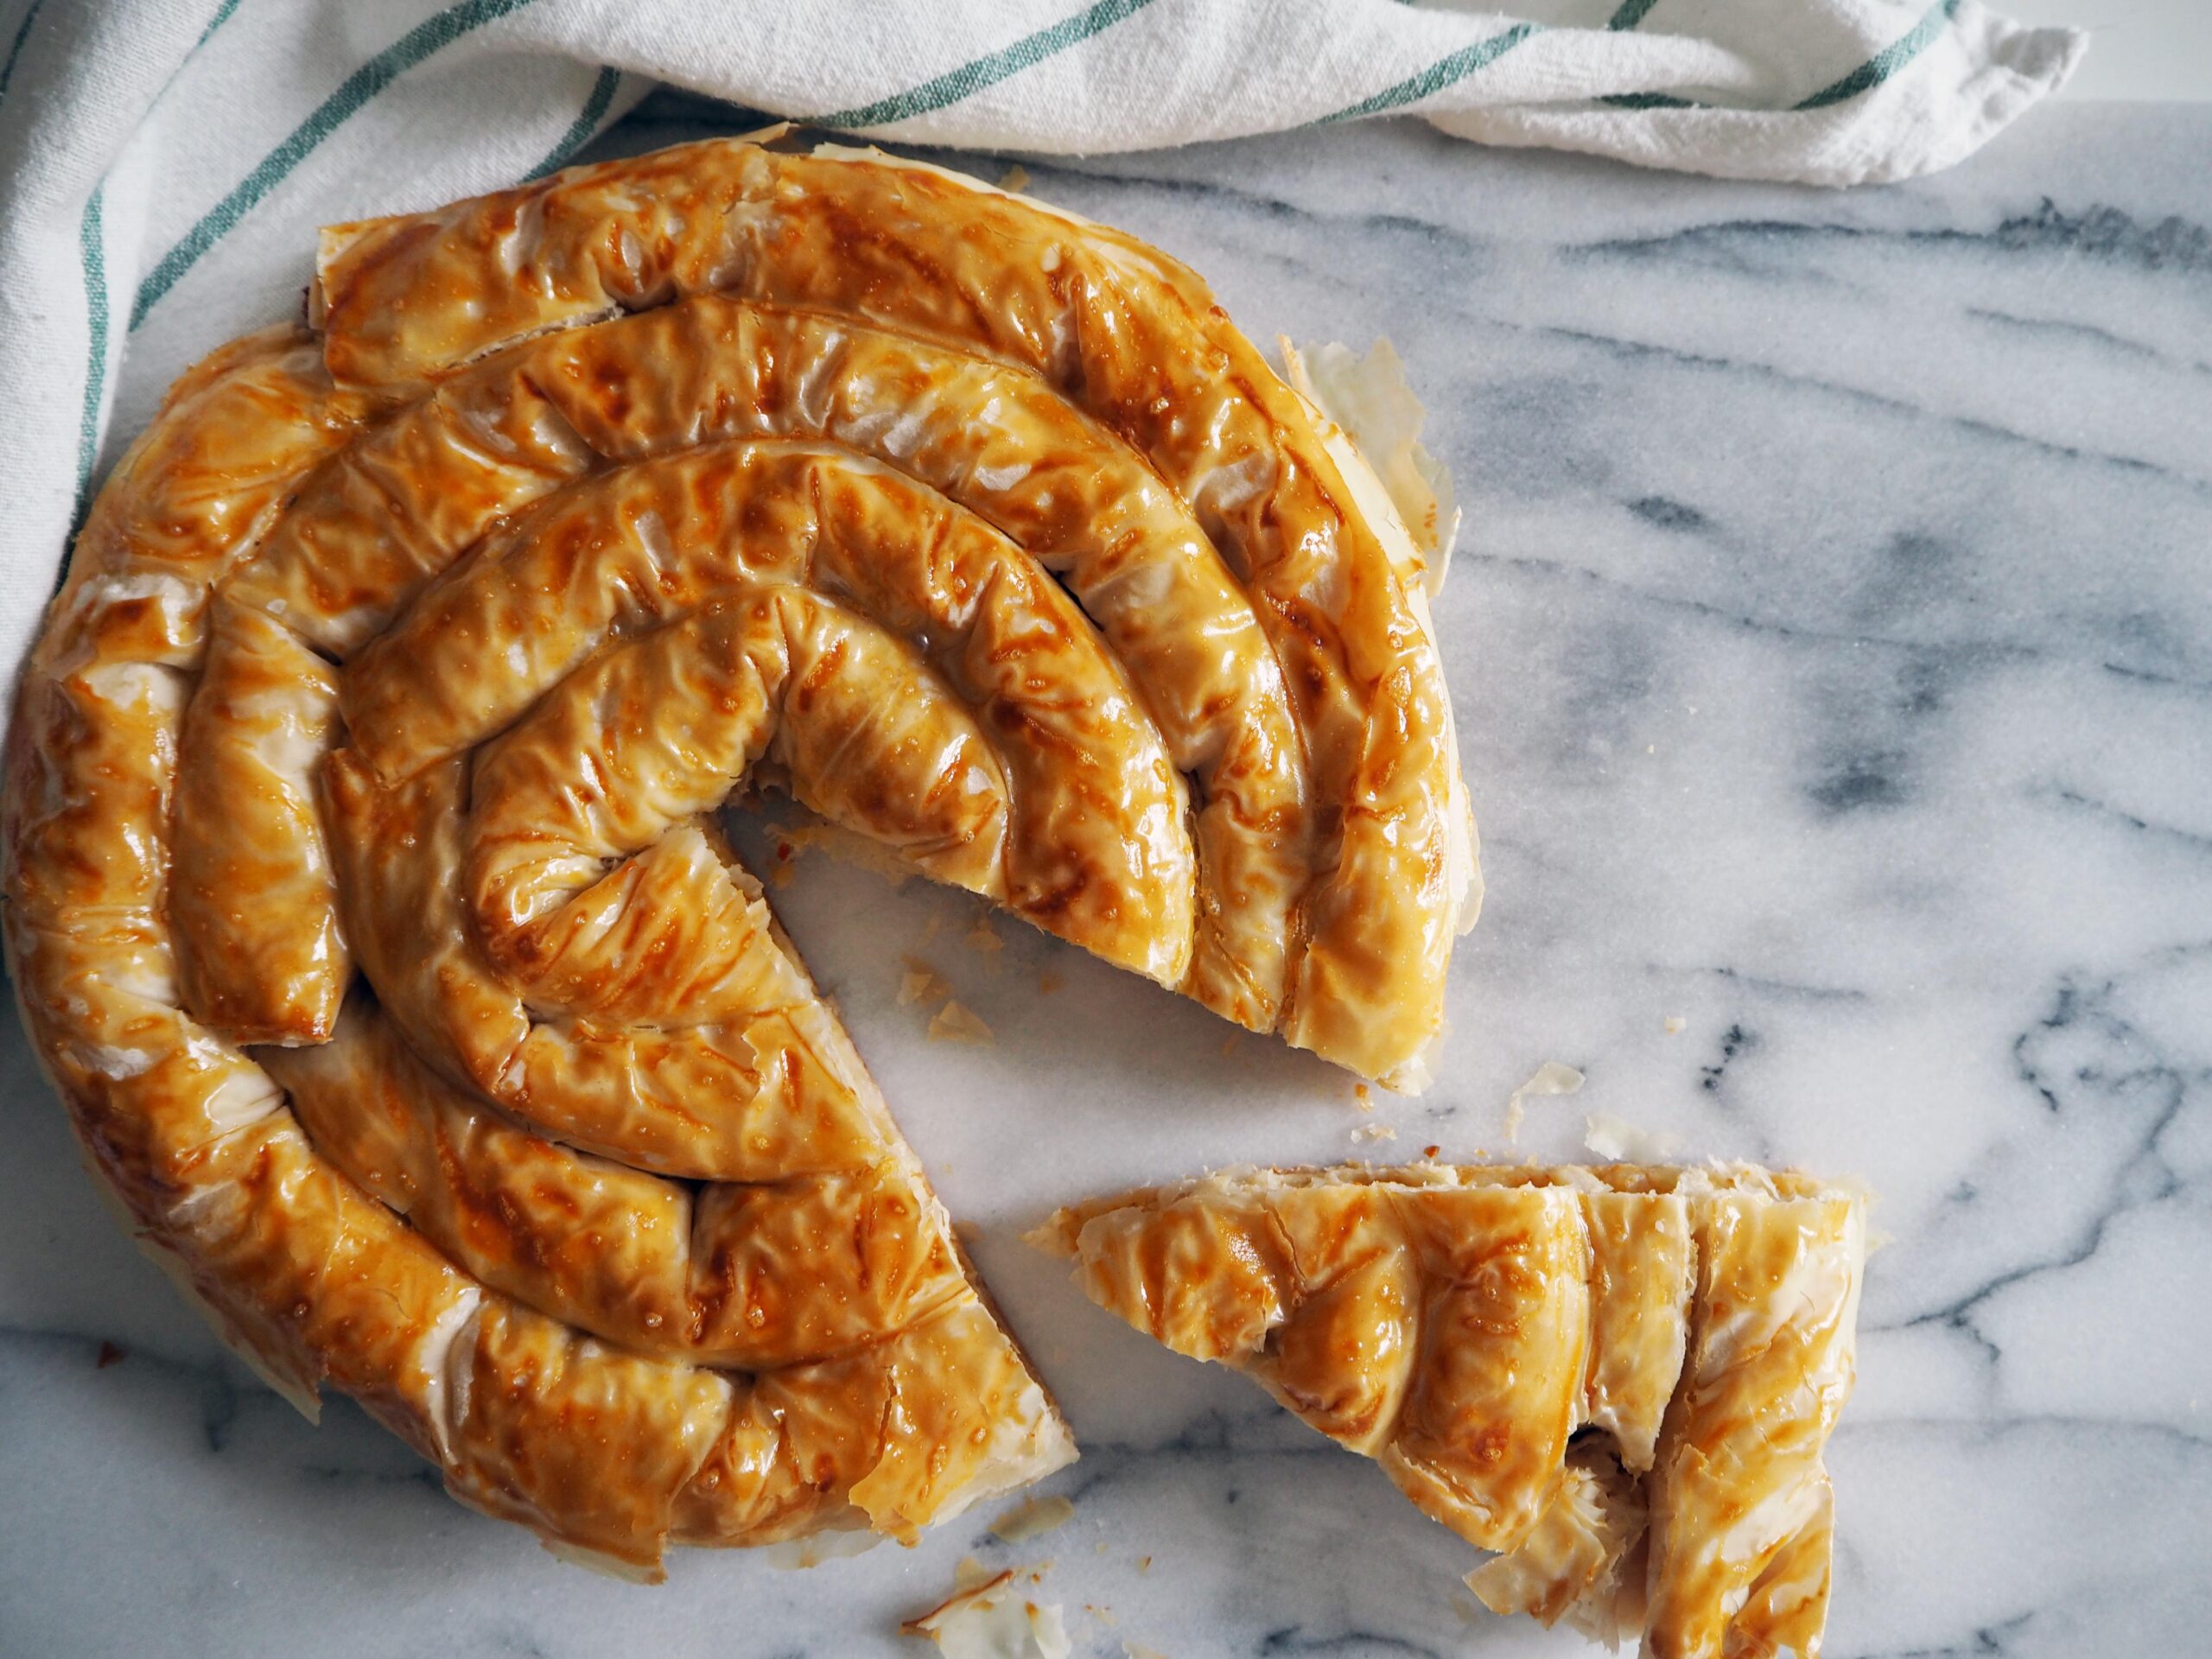  A savory and flaky pastry twist that's perfect for brunch or as a snack